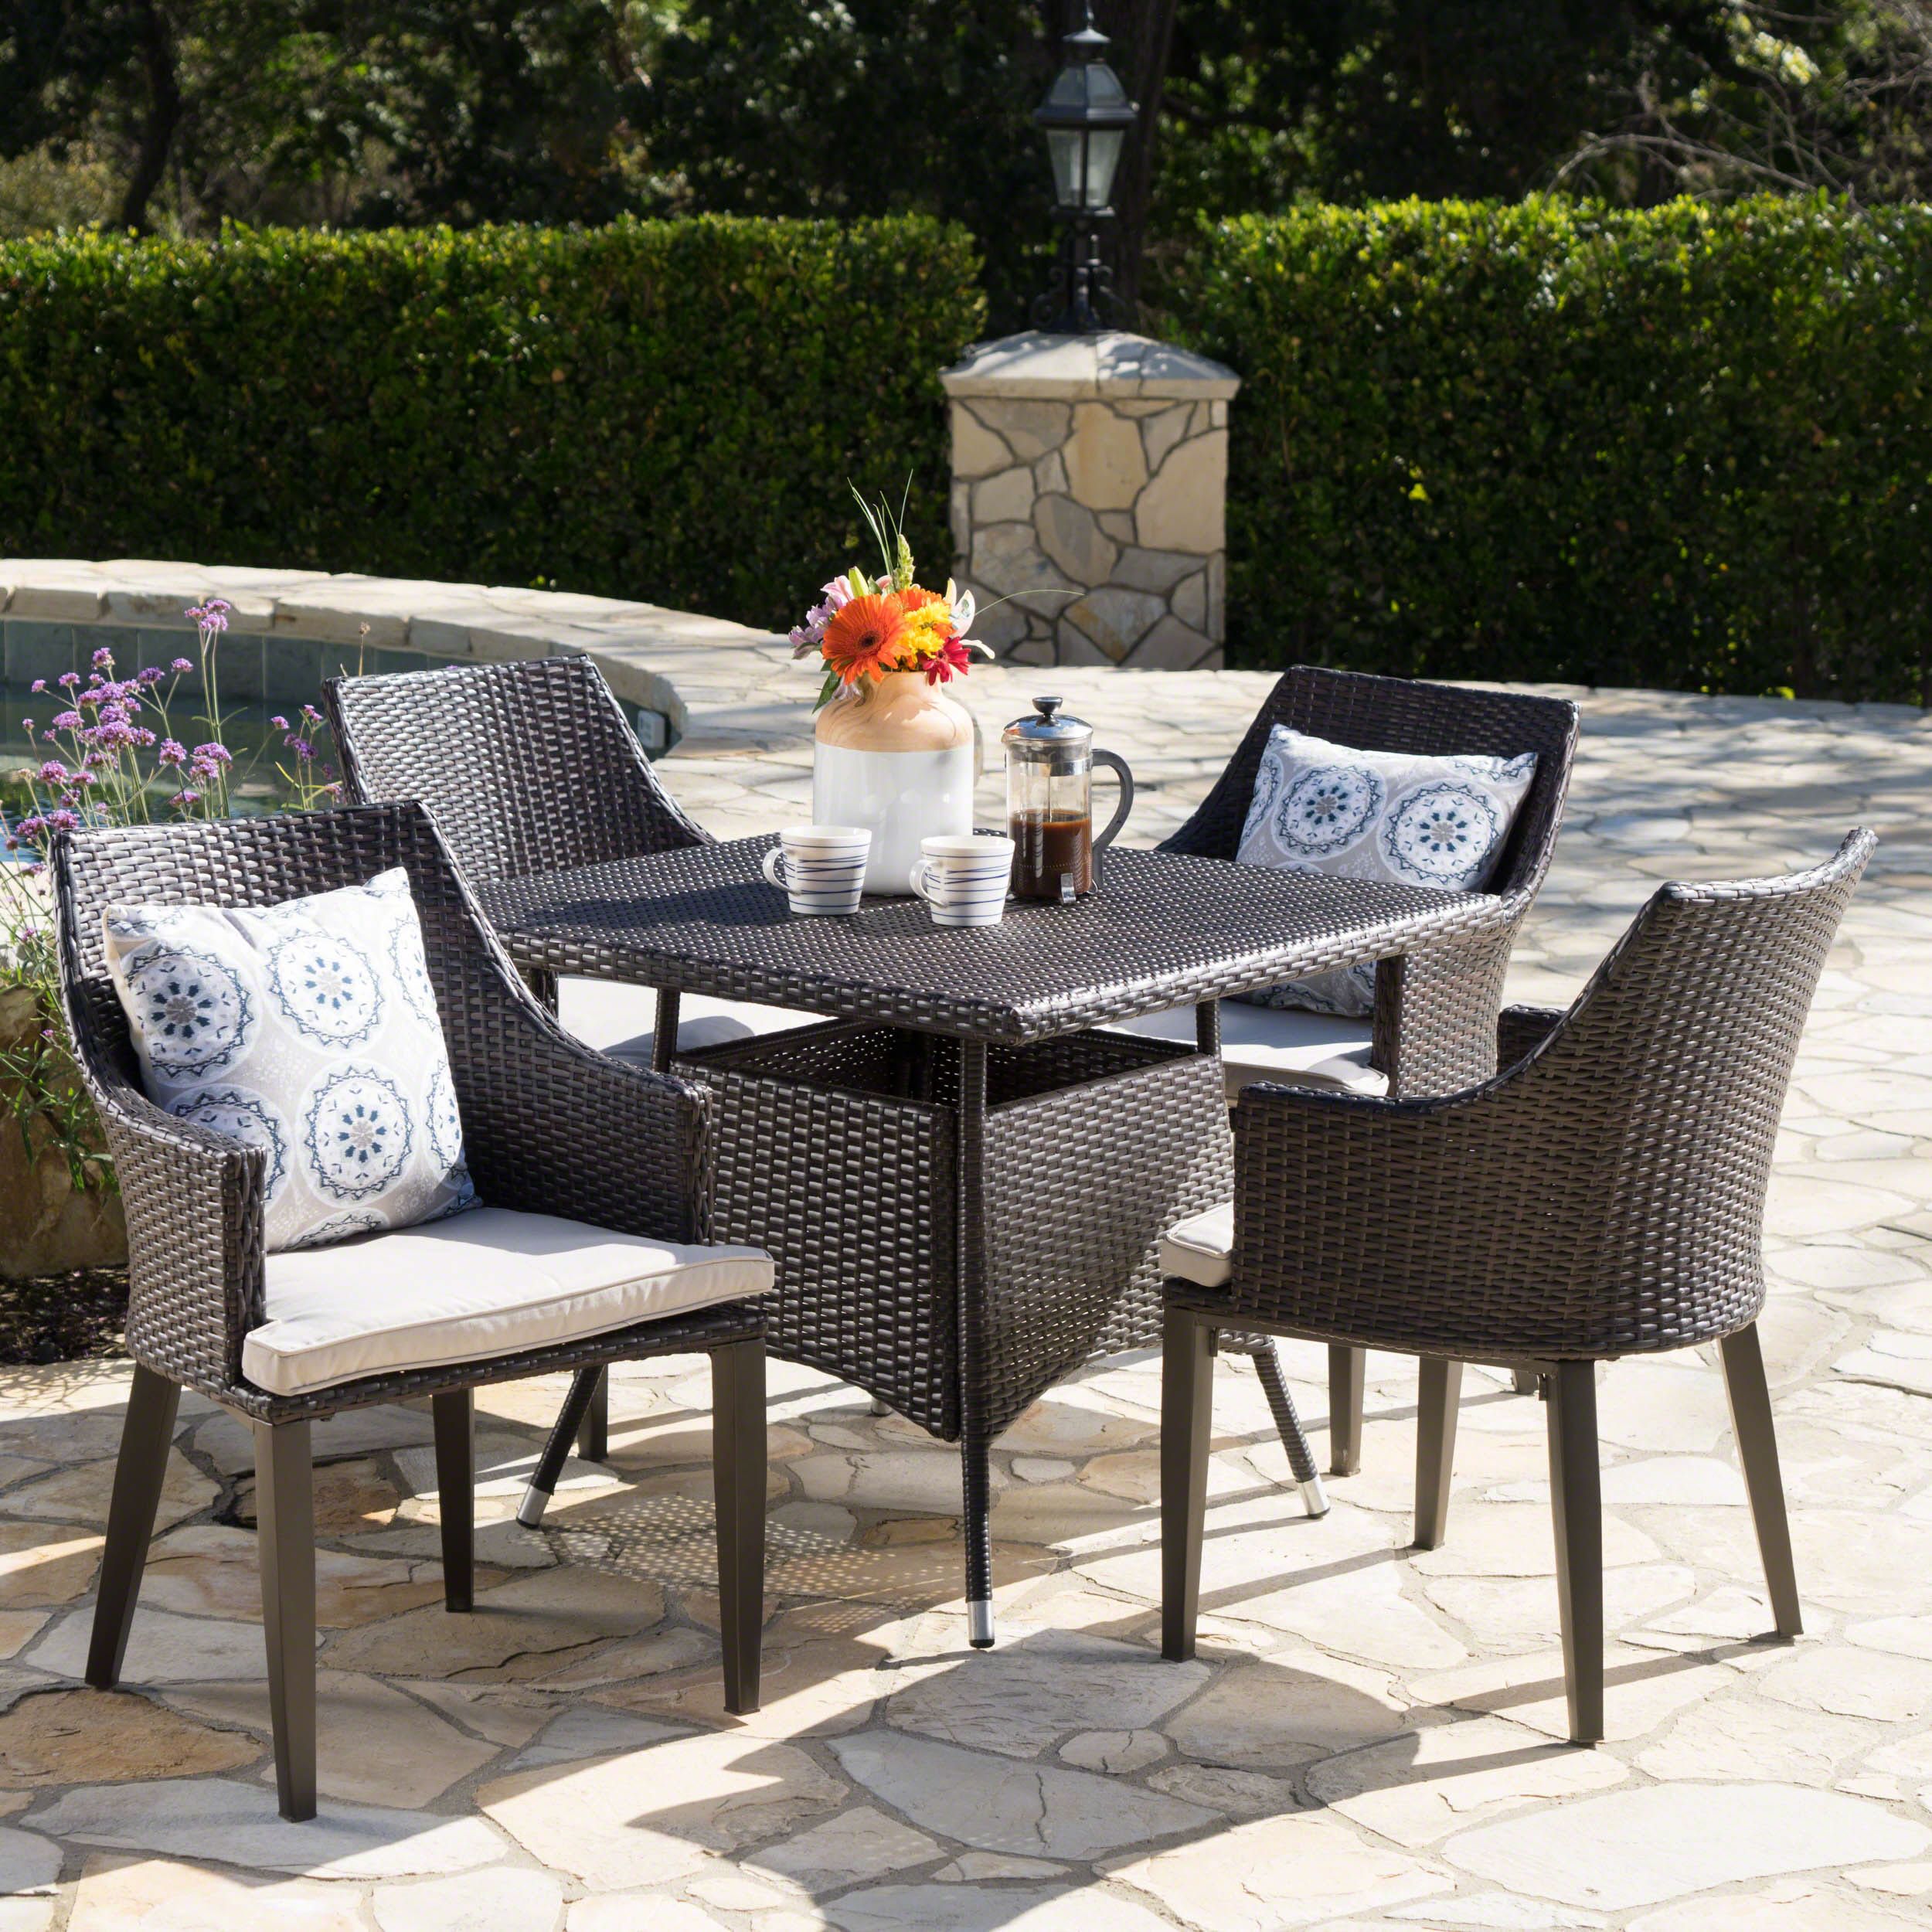 Hillsdale Outdoor 5 Piece Wicker Square Dining Set With Cushions Within Patio Dining Sets With Cushions (View 1 of 15)